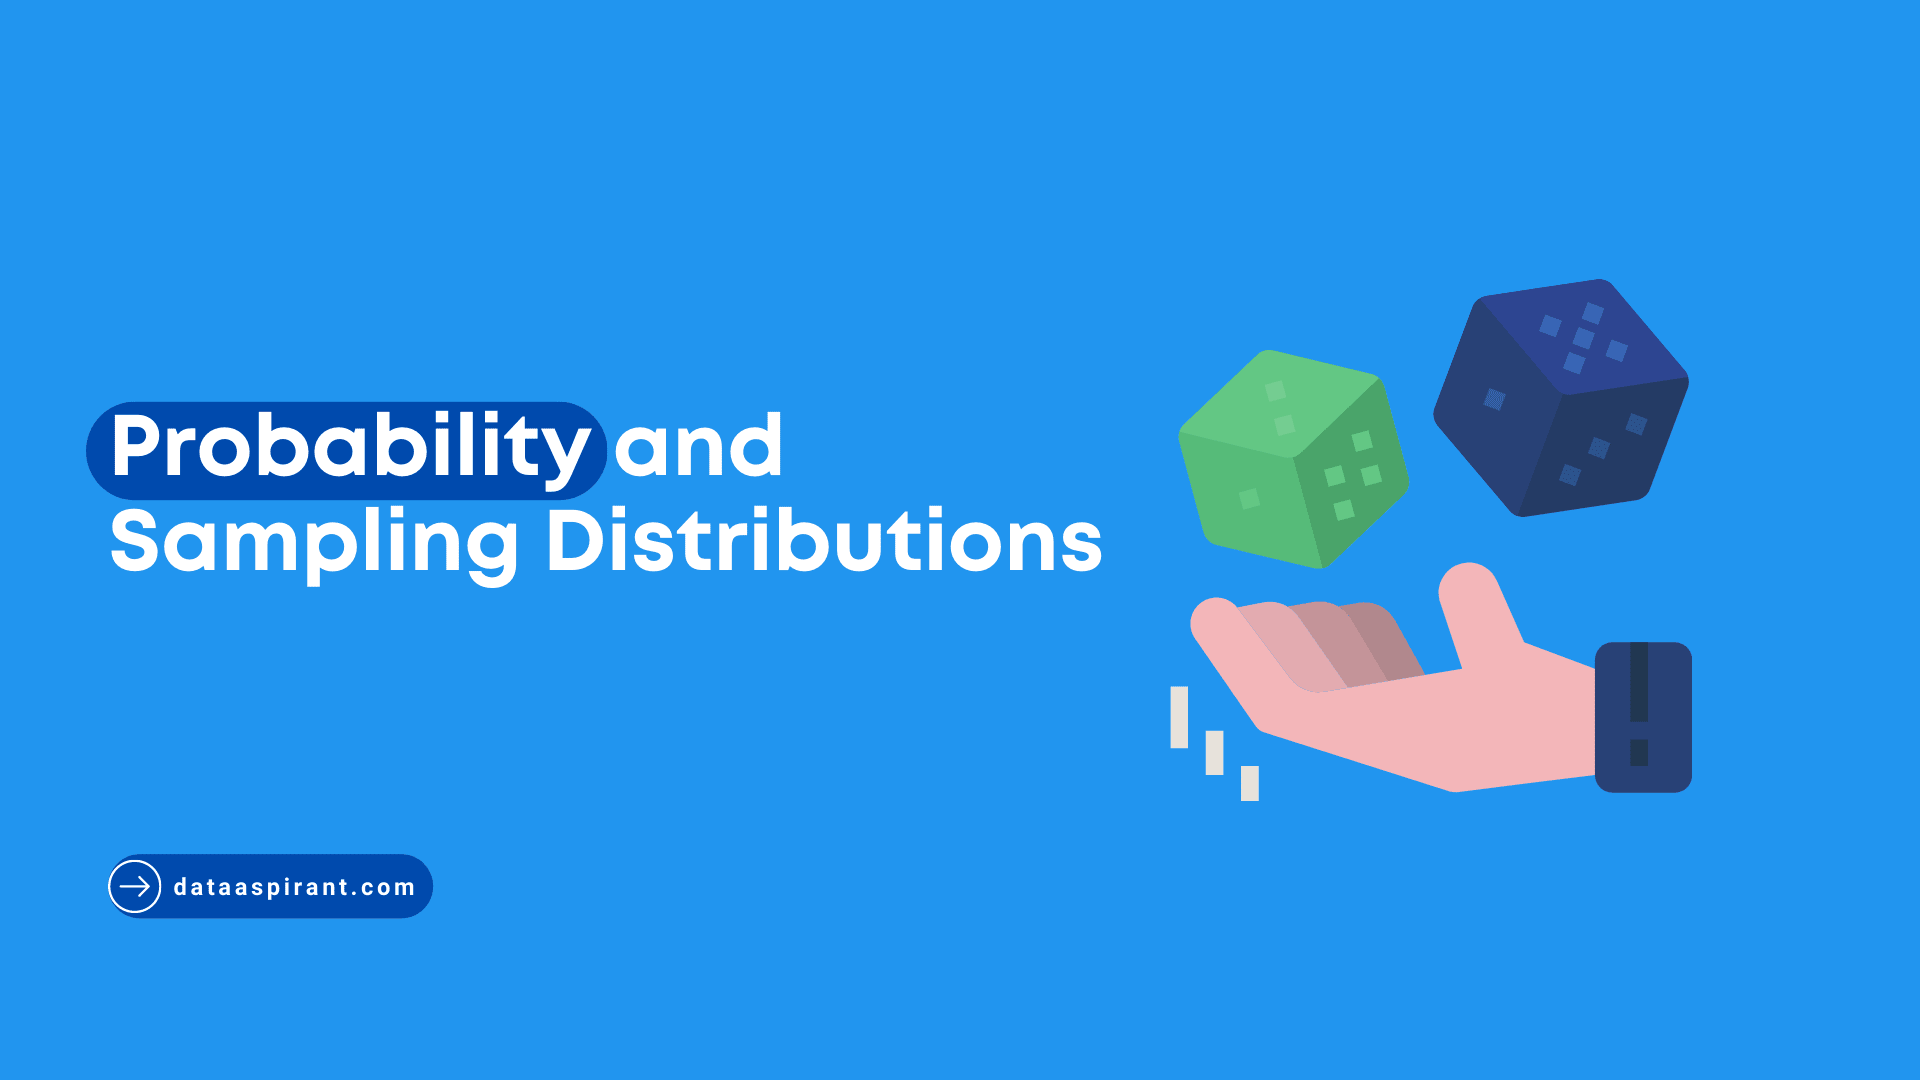 Probability and Sampling Distributions